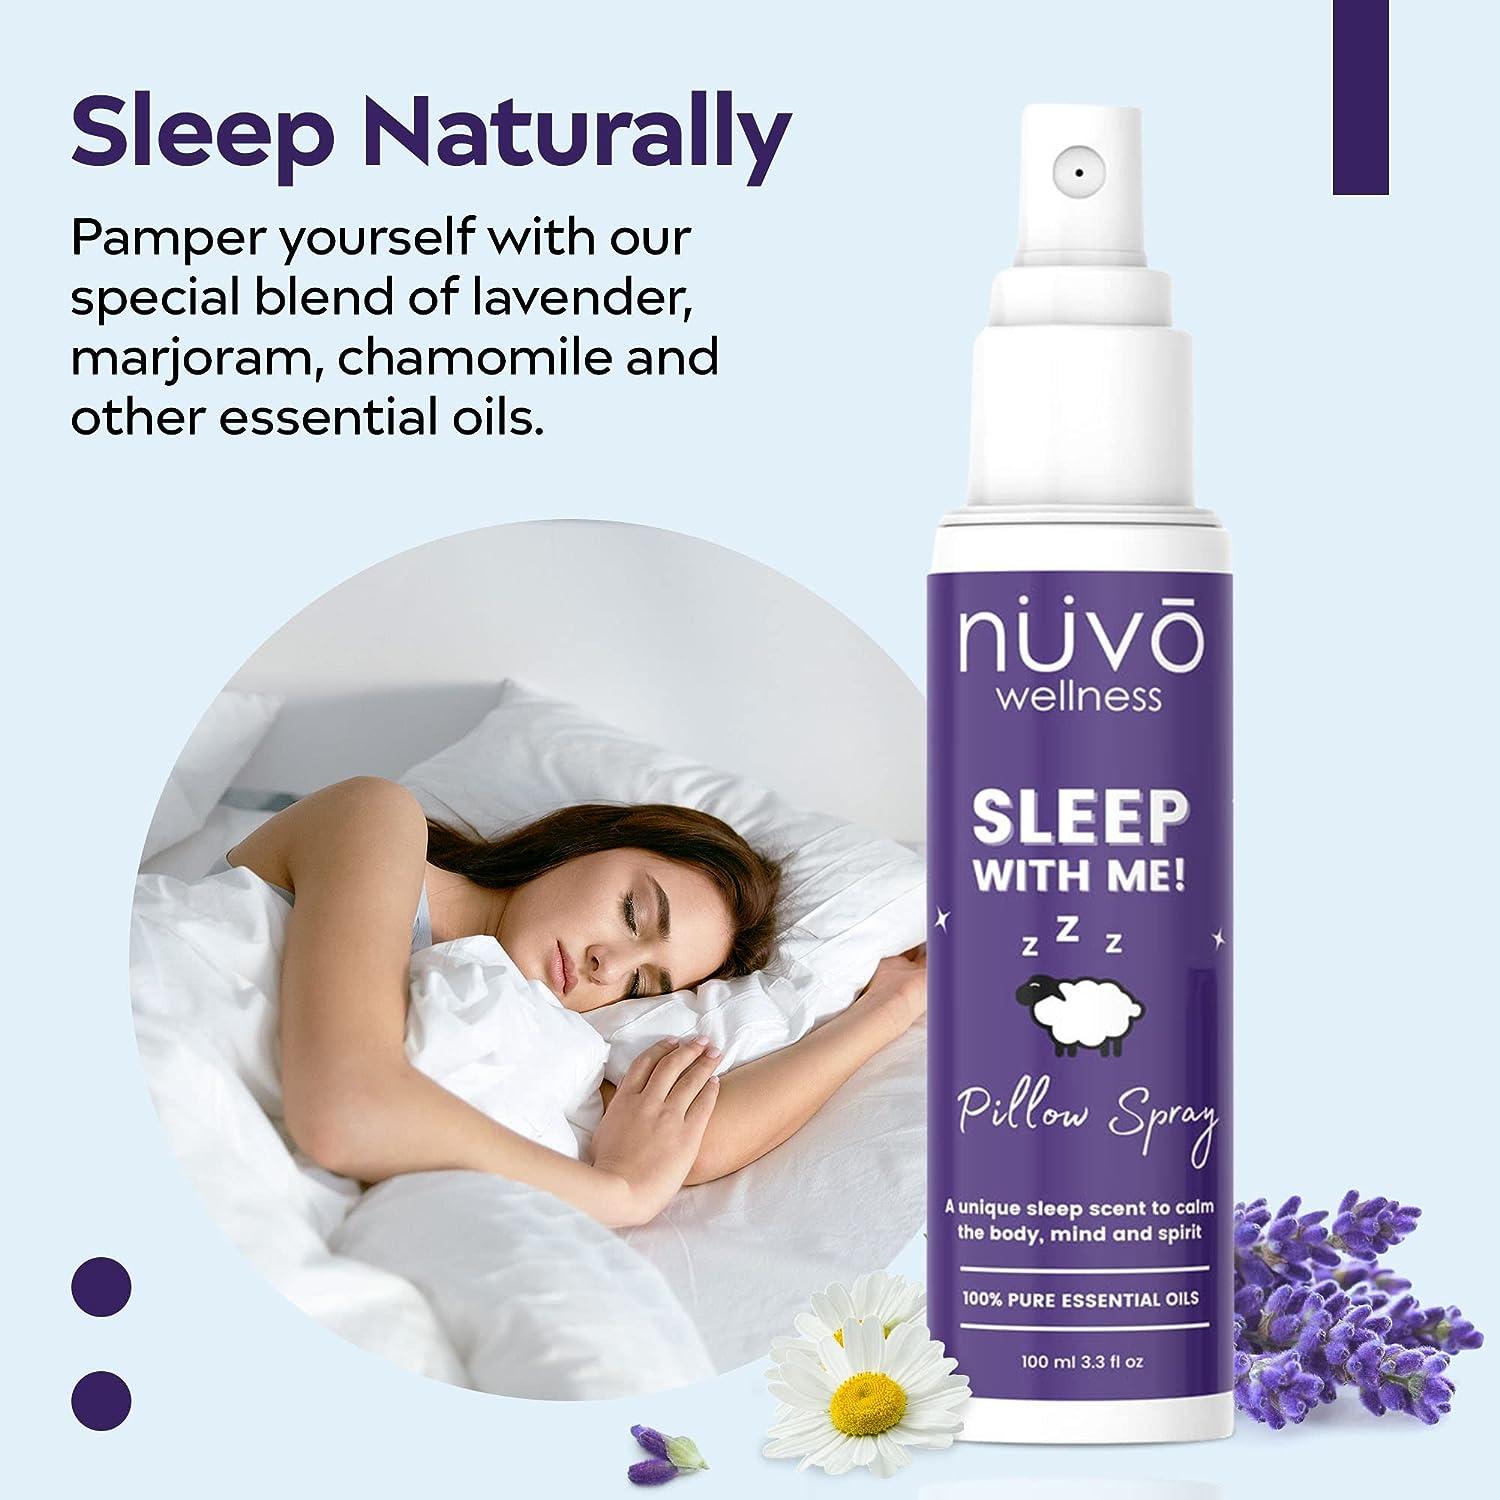 French Lavender Pillow Spray - Aromatherapy For Sleep - Lavender for Sleep  - Lavender Gift